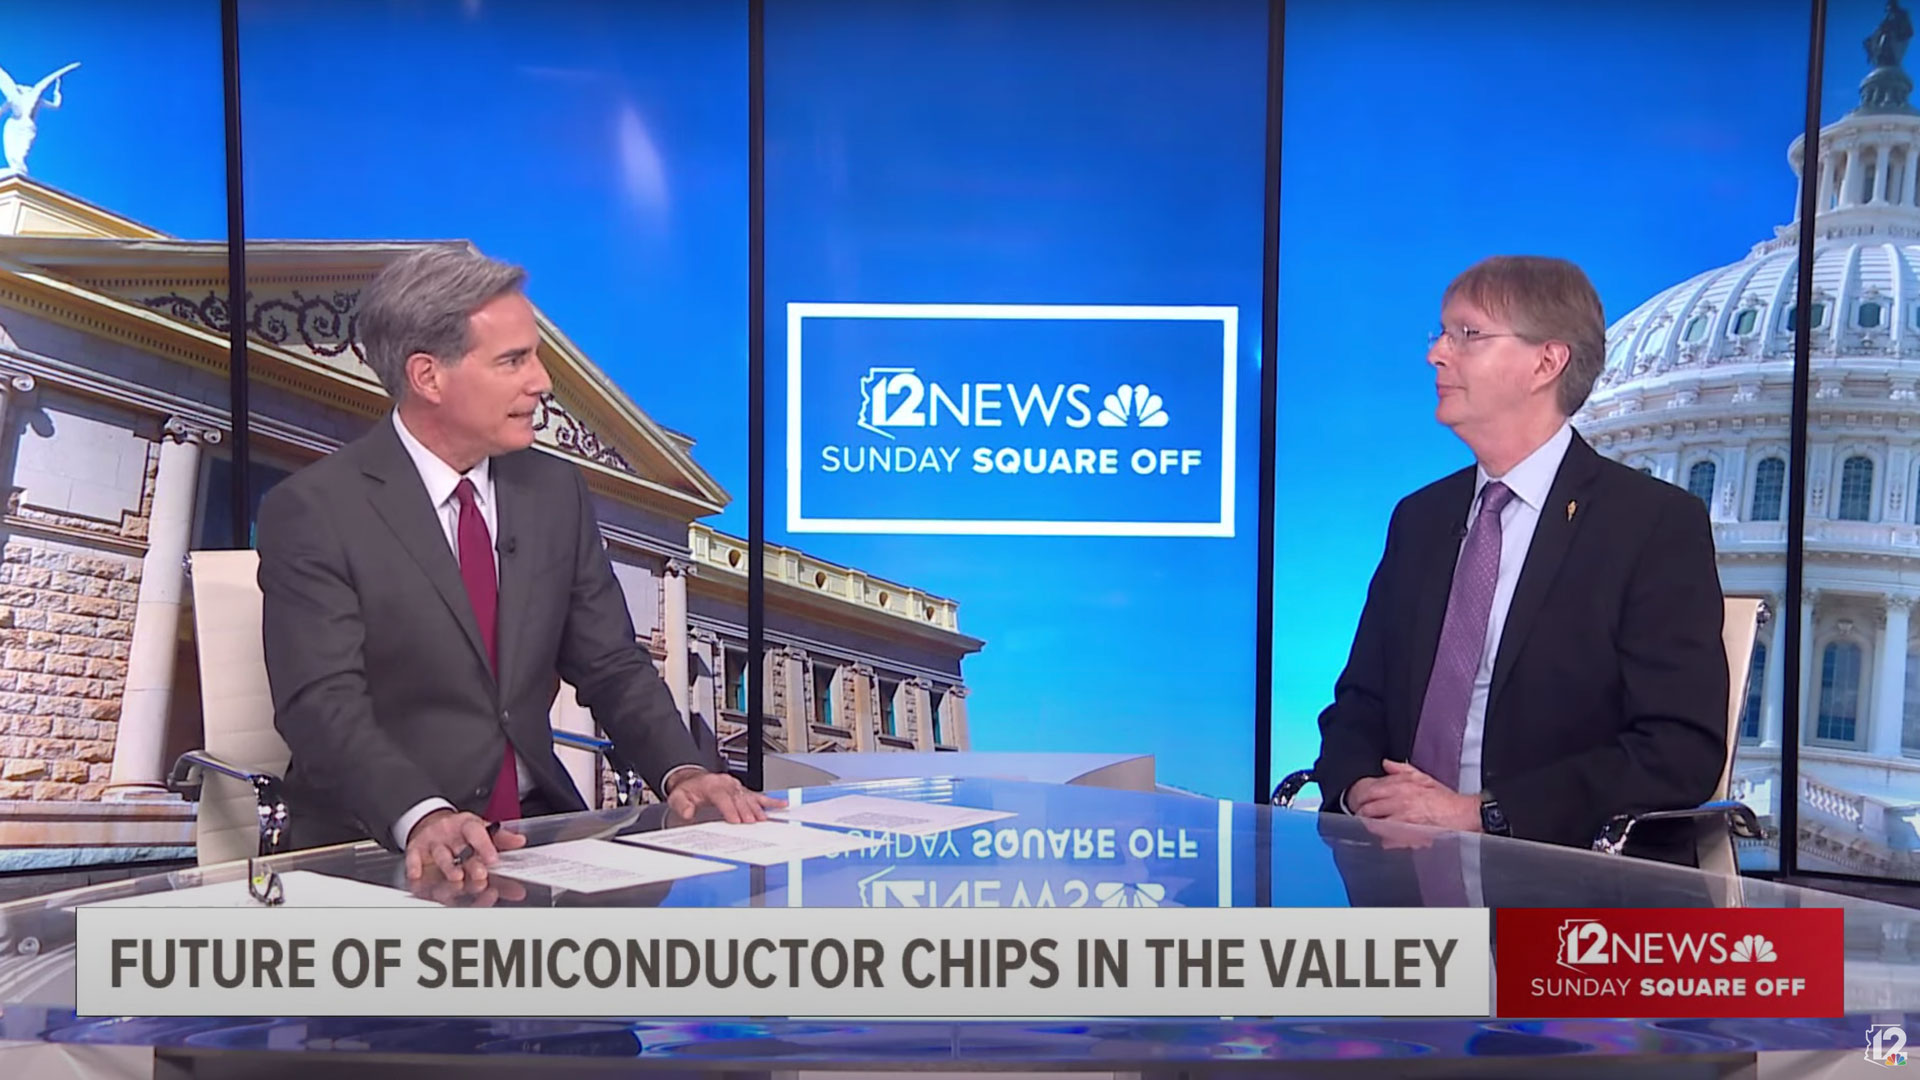 A screenshot of a 12 News Sunday Square Off video with Kyle Squires discussing the future of semiconductor chips in the Valley.